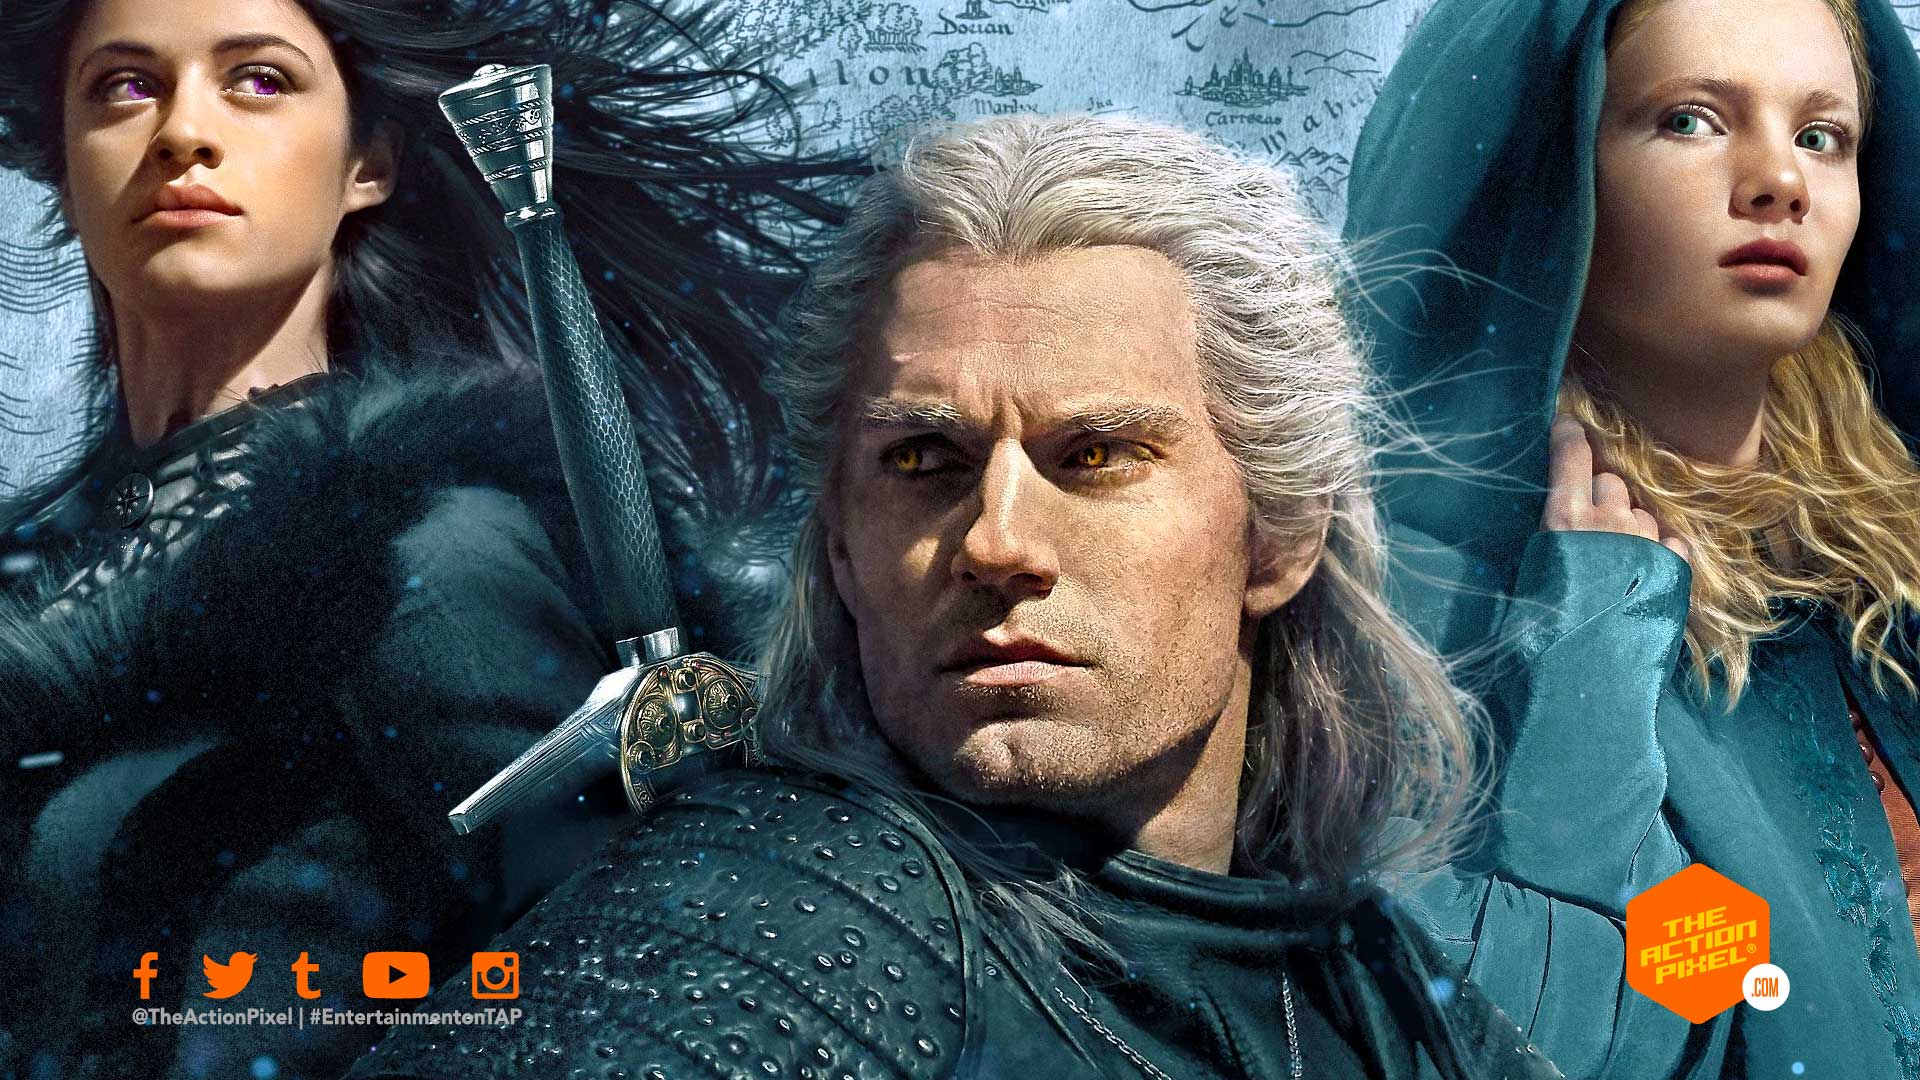 Netflix The Witcher 2019 Wallpapers